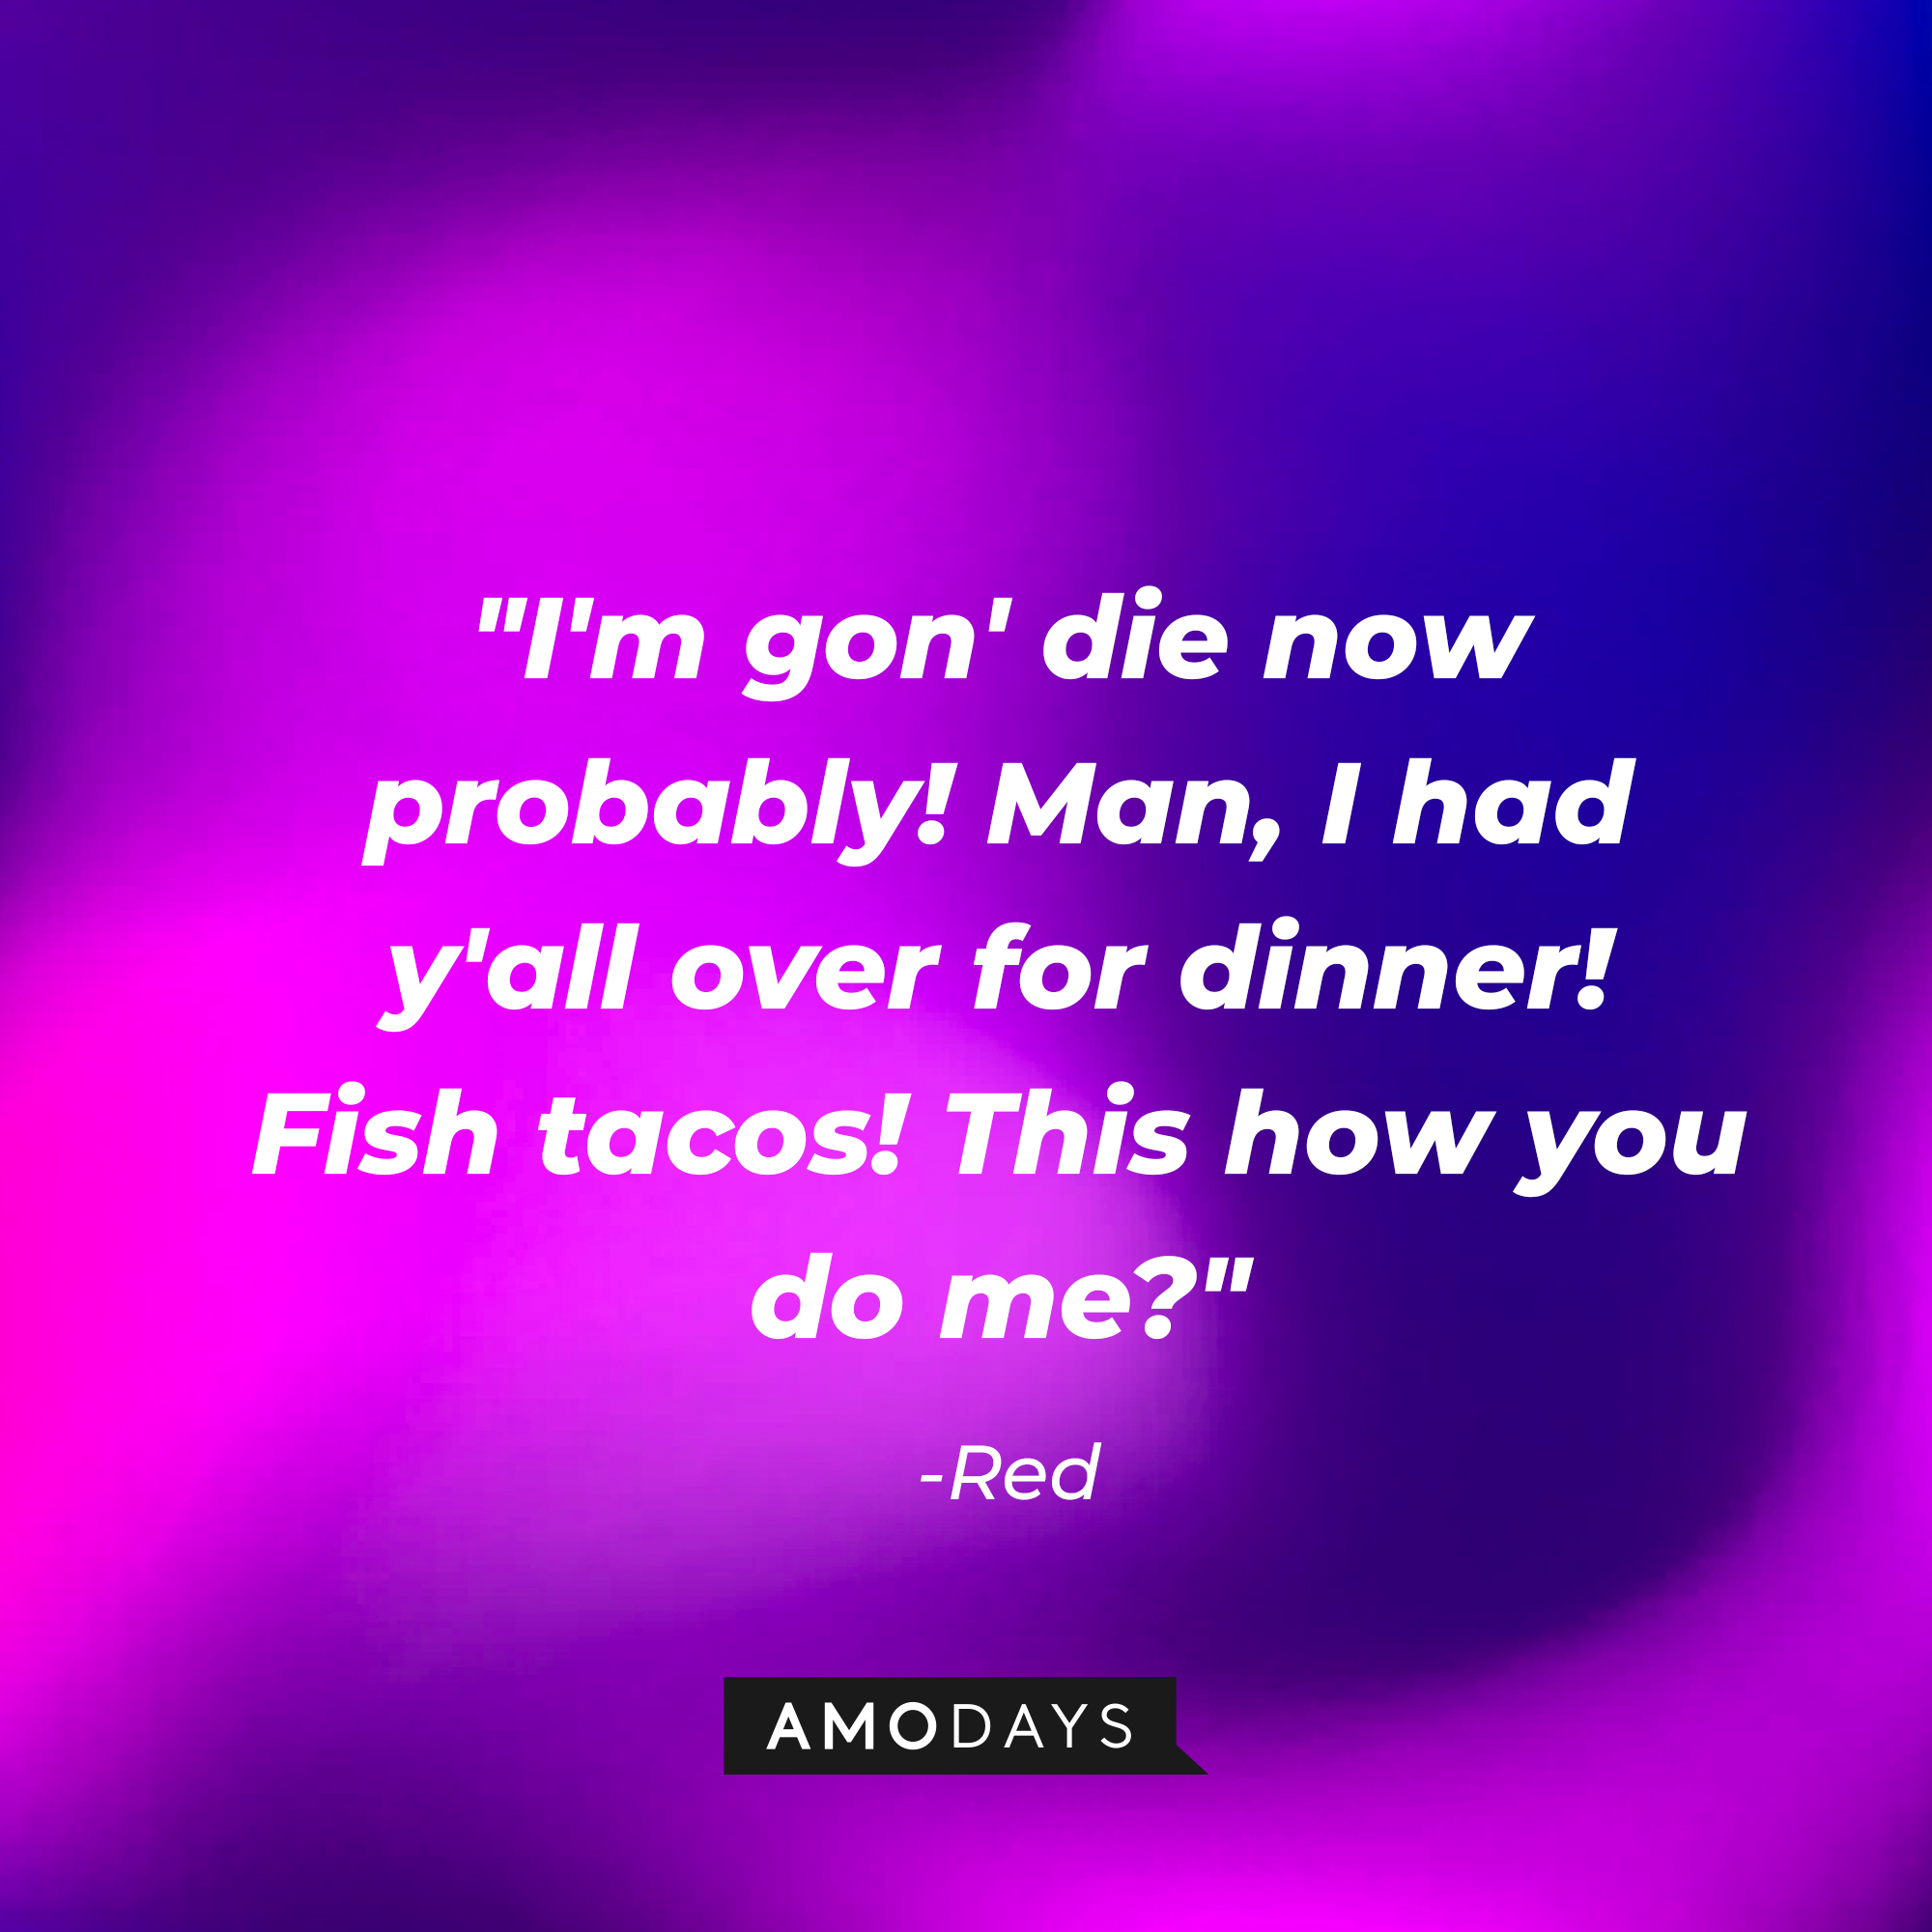 Red's quote: "I'm gon' die now probably! Man, i had y'all over for dinner! Fish tacos! This how you do me?" | Source: AmoDays